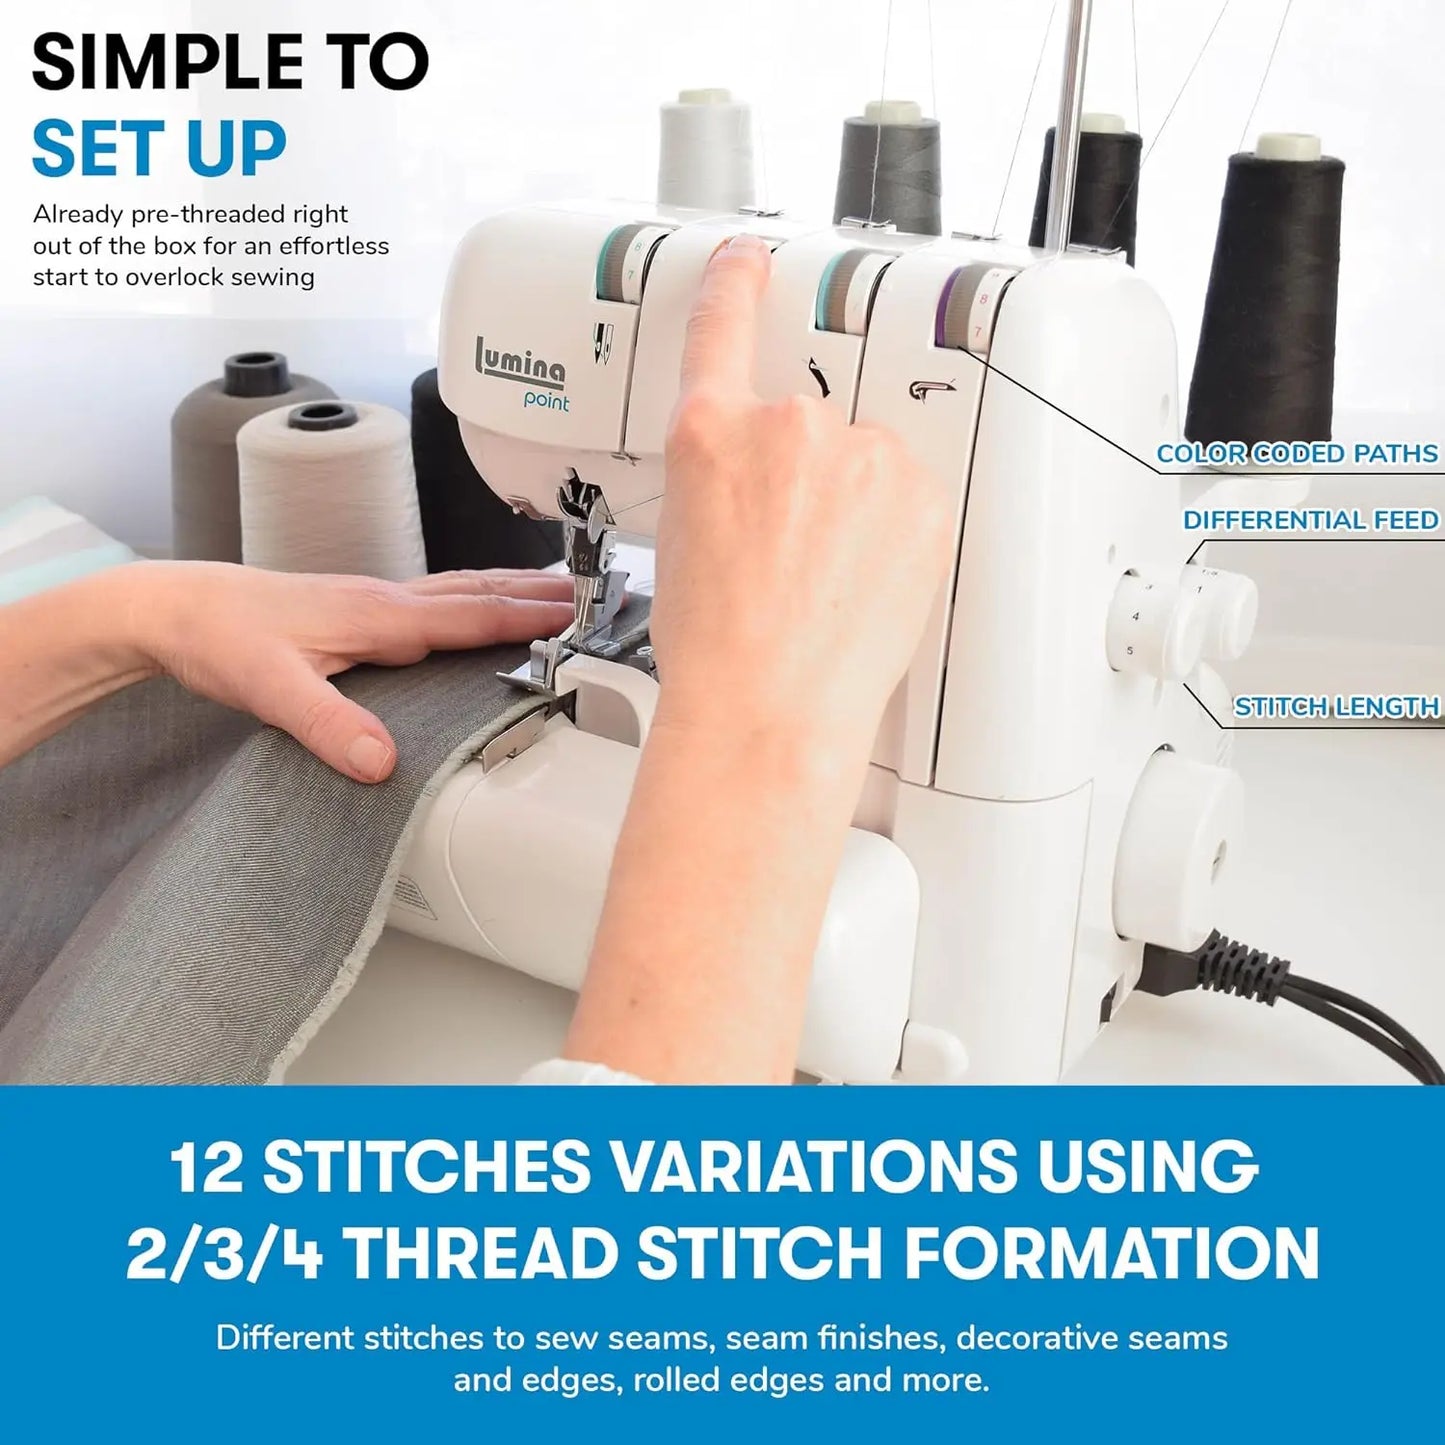 Strong 2/3/4 Serger Thread Capability, Sewing Machine